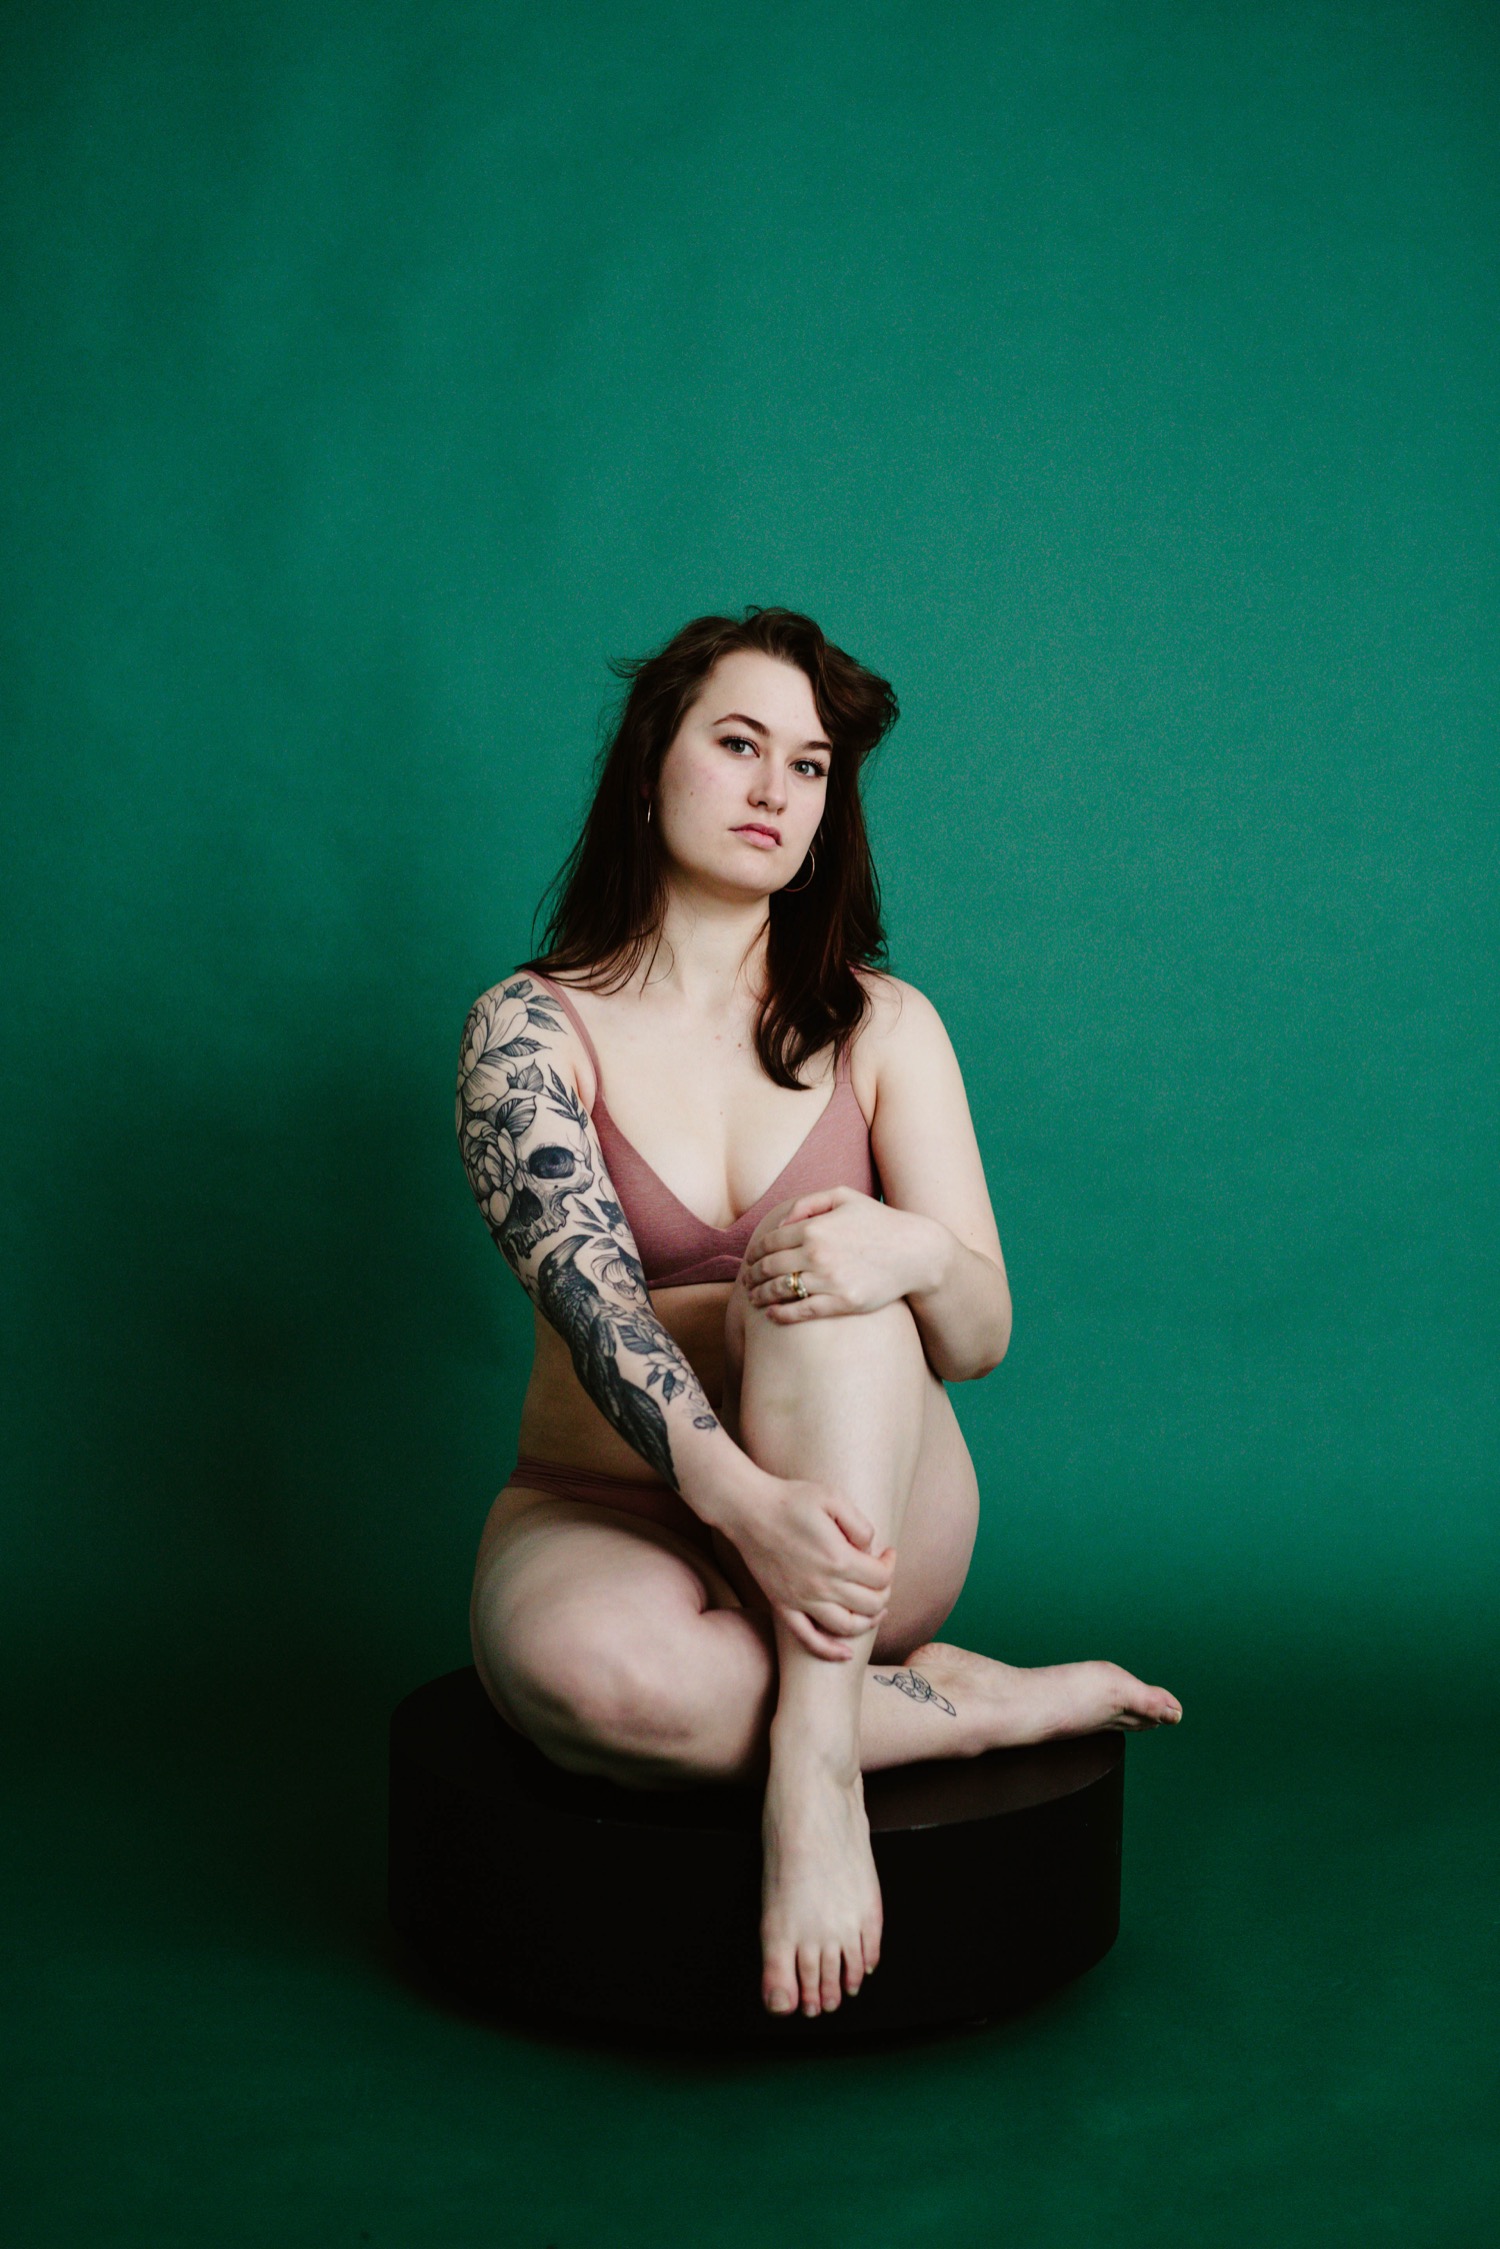 woman with tattoos sits in front of green backdrop